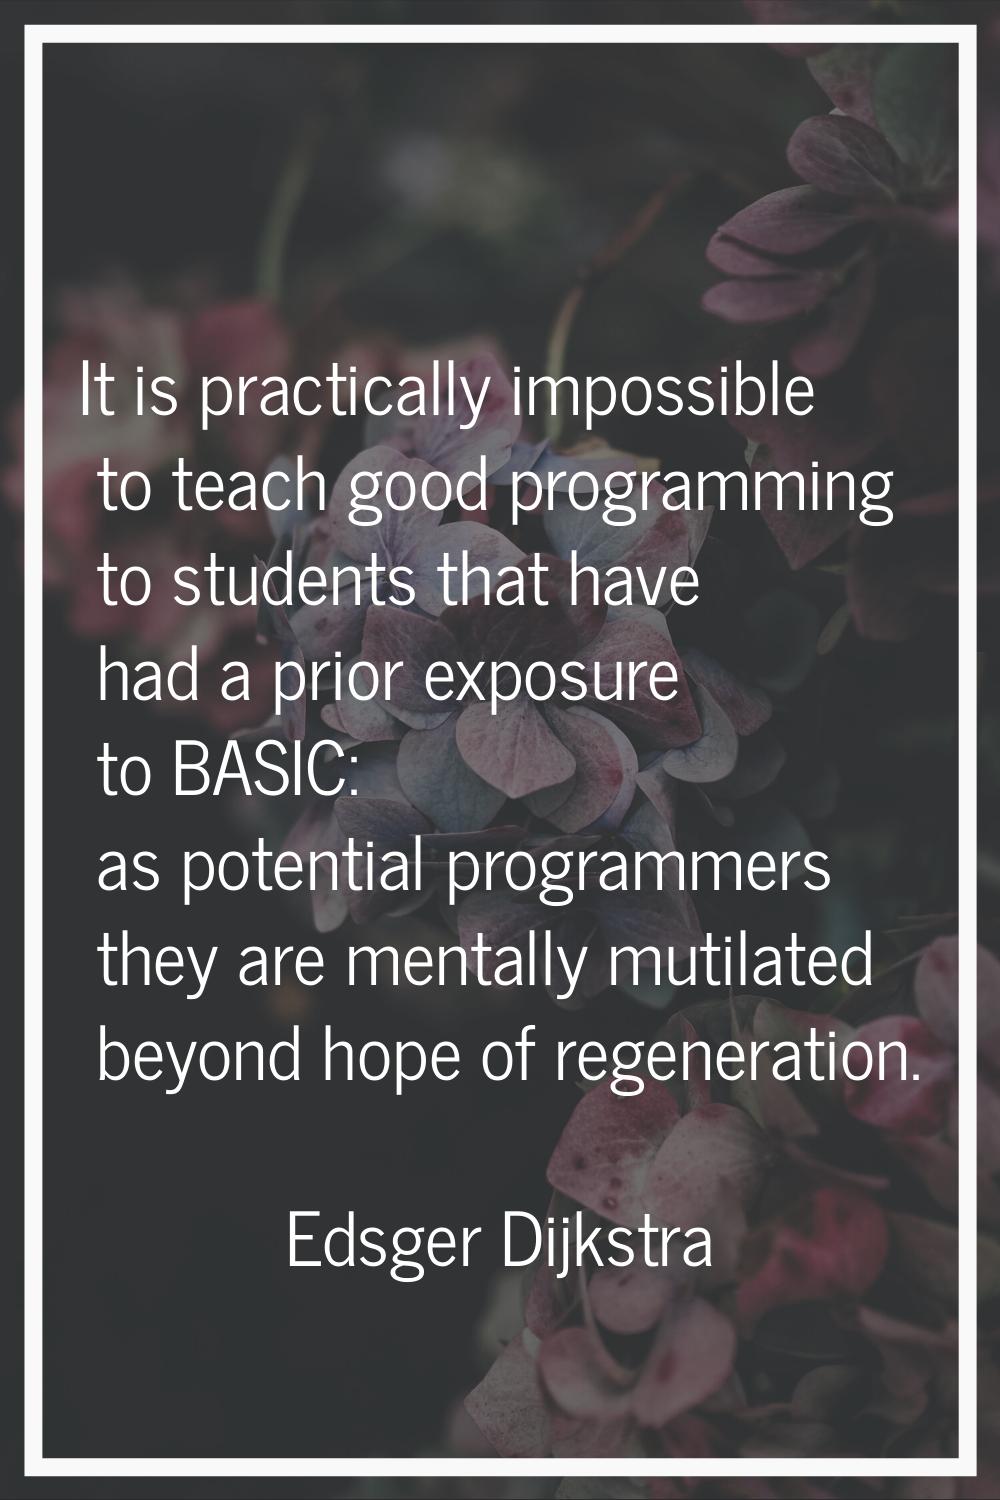 It is practically impossible to teach good programming to students that have had a prior exposure t